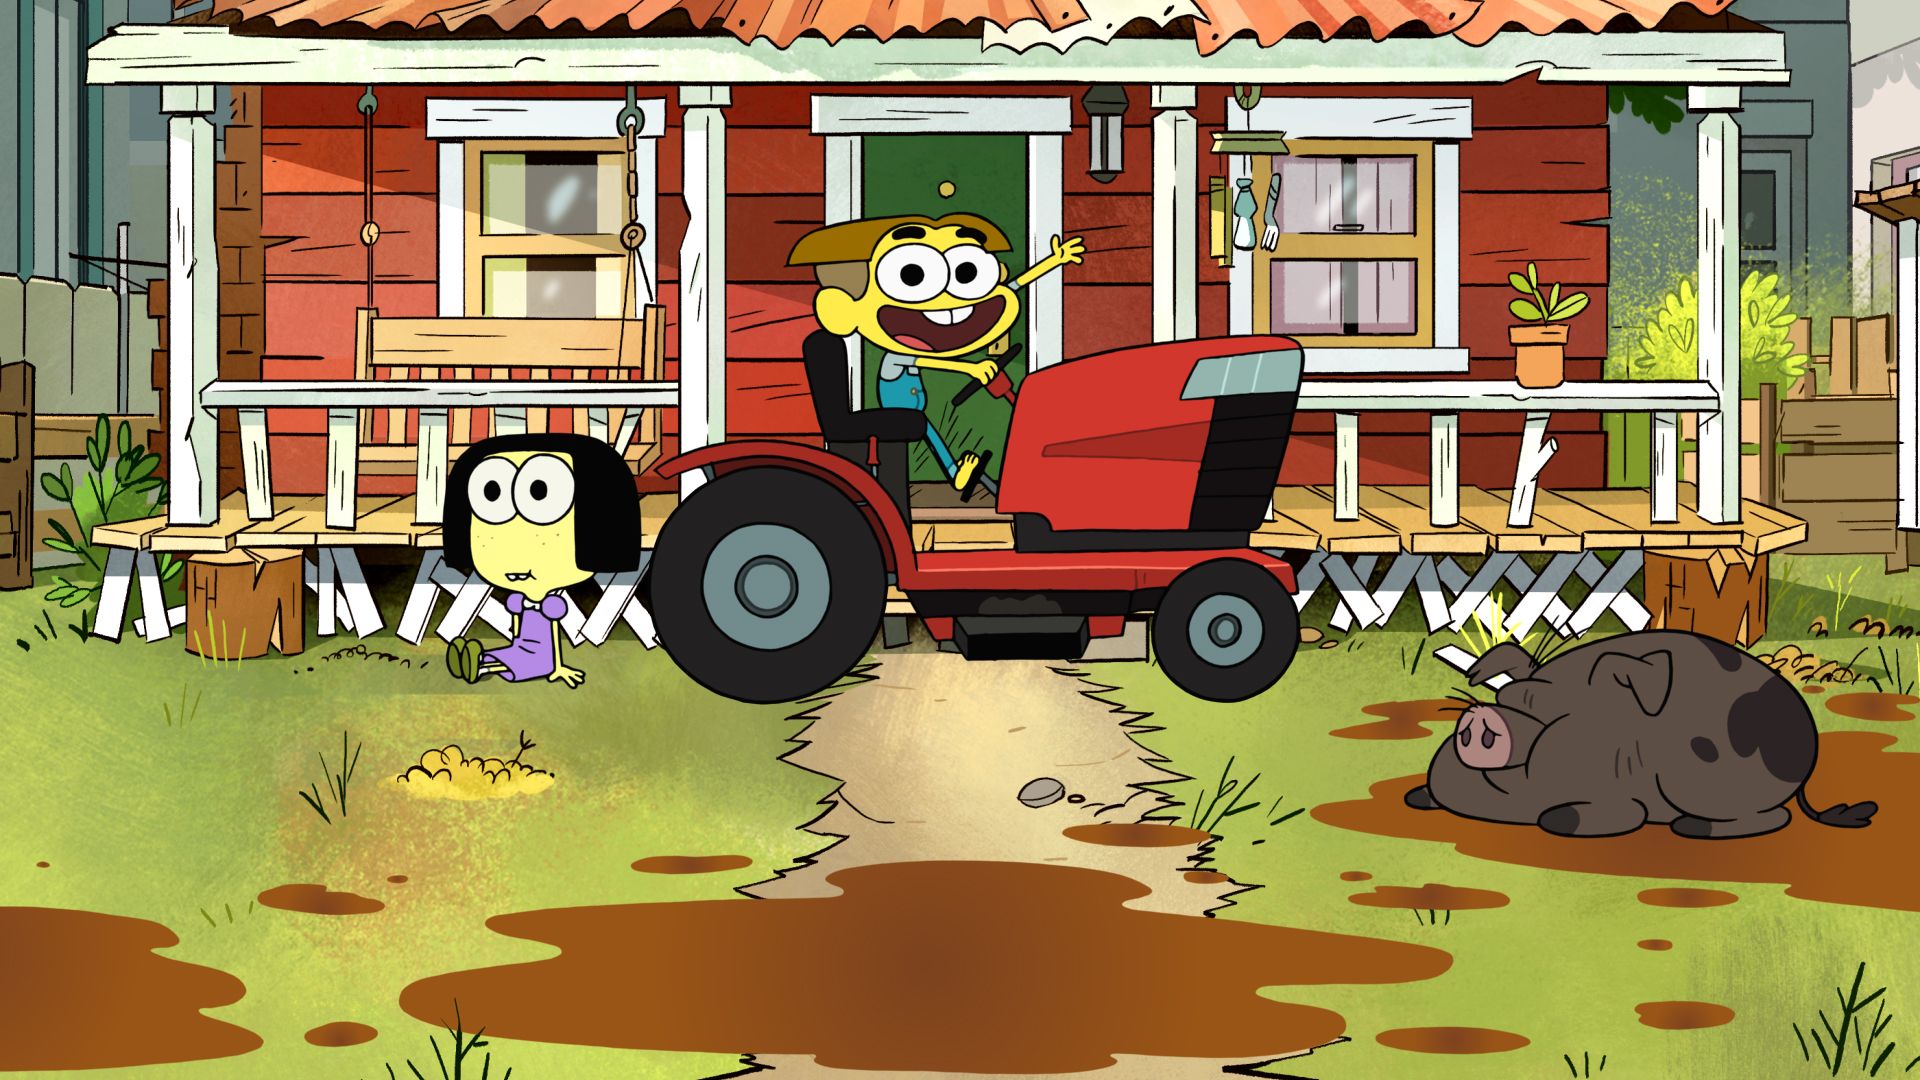 Meet The Greens and The Houghton Brothers from BIG CITY GREENS